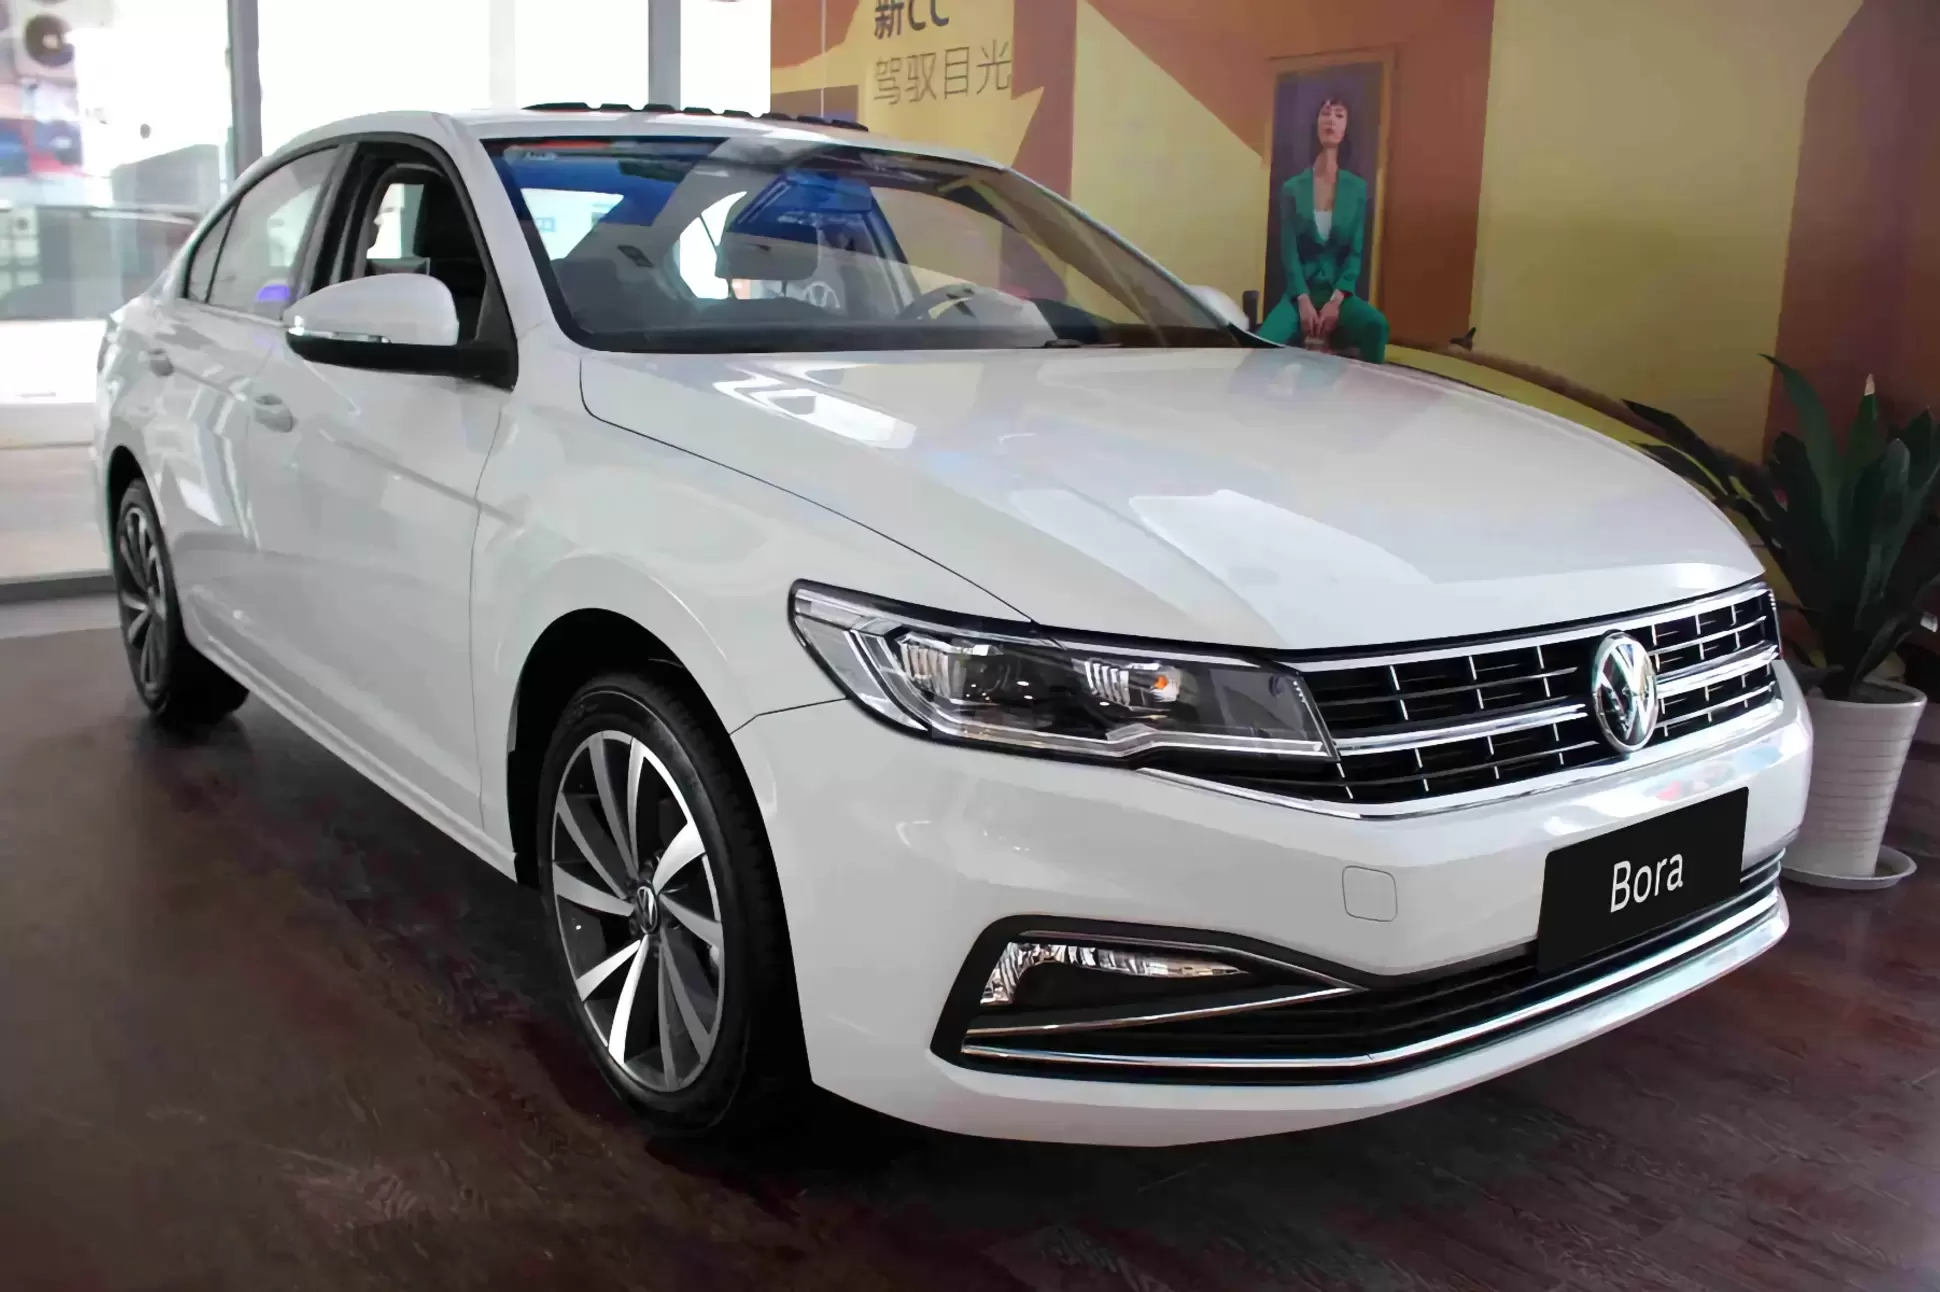 New Volkswagen Bora from China are in demand: prices began to rise